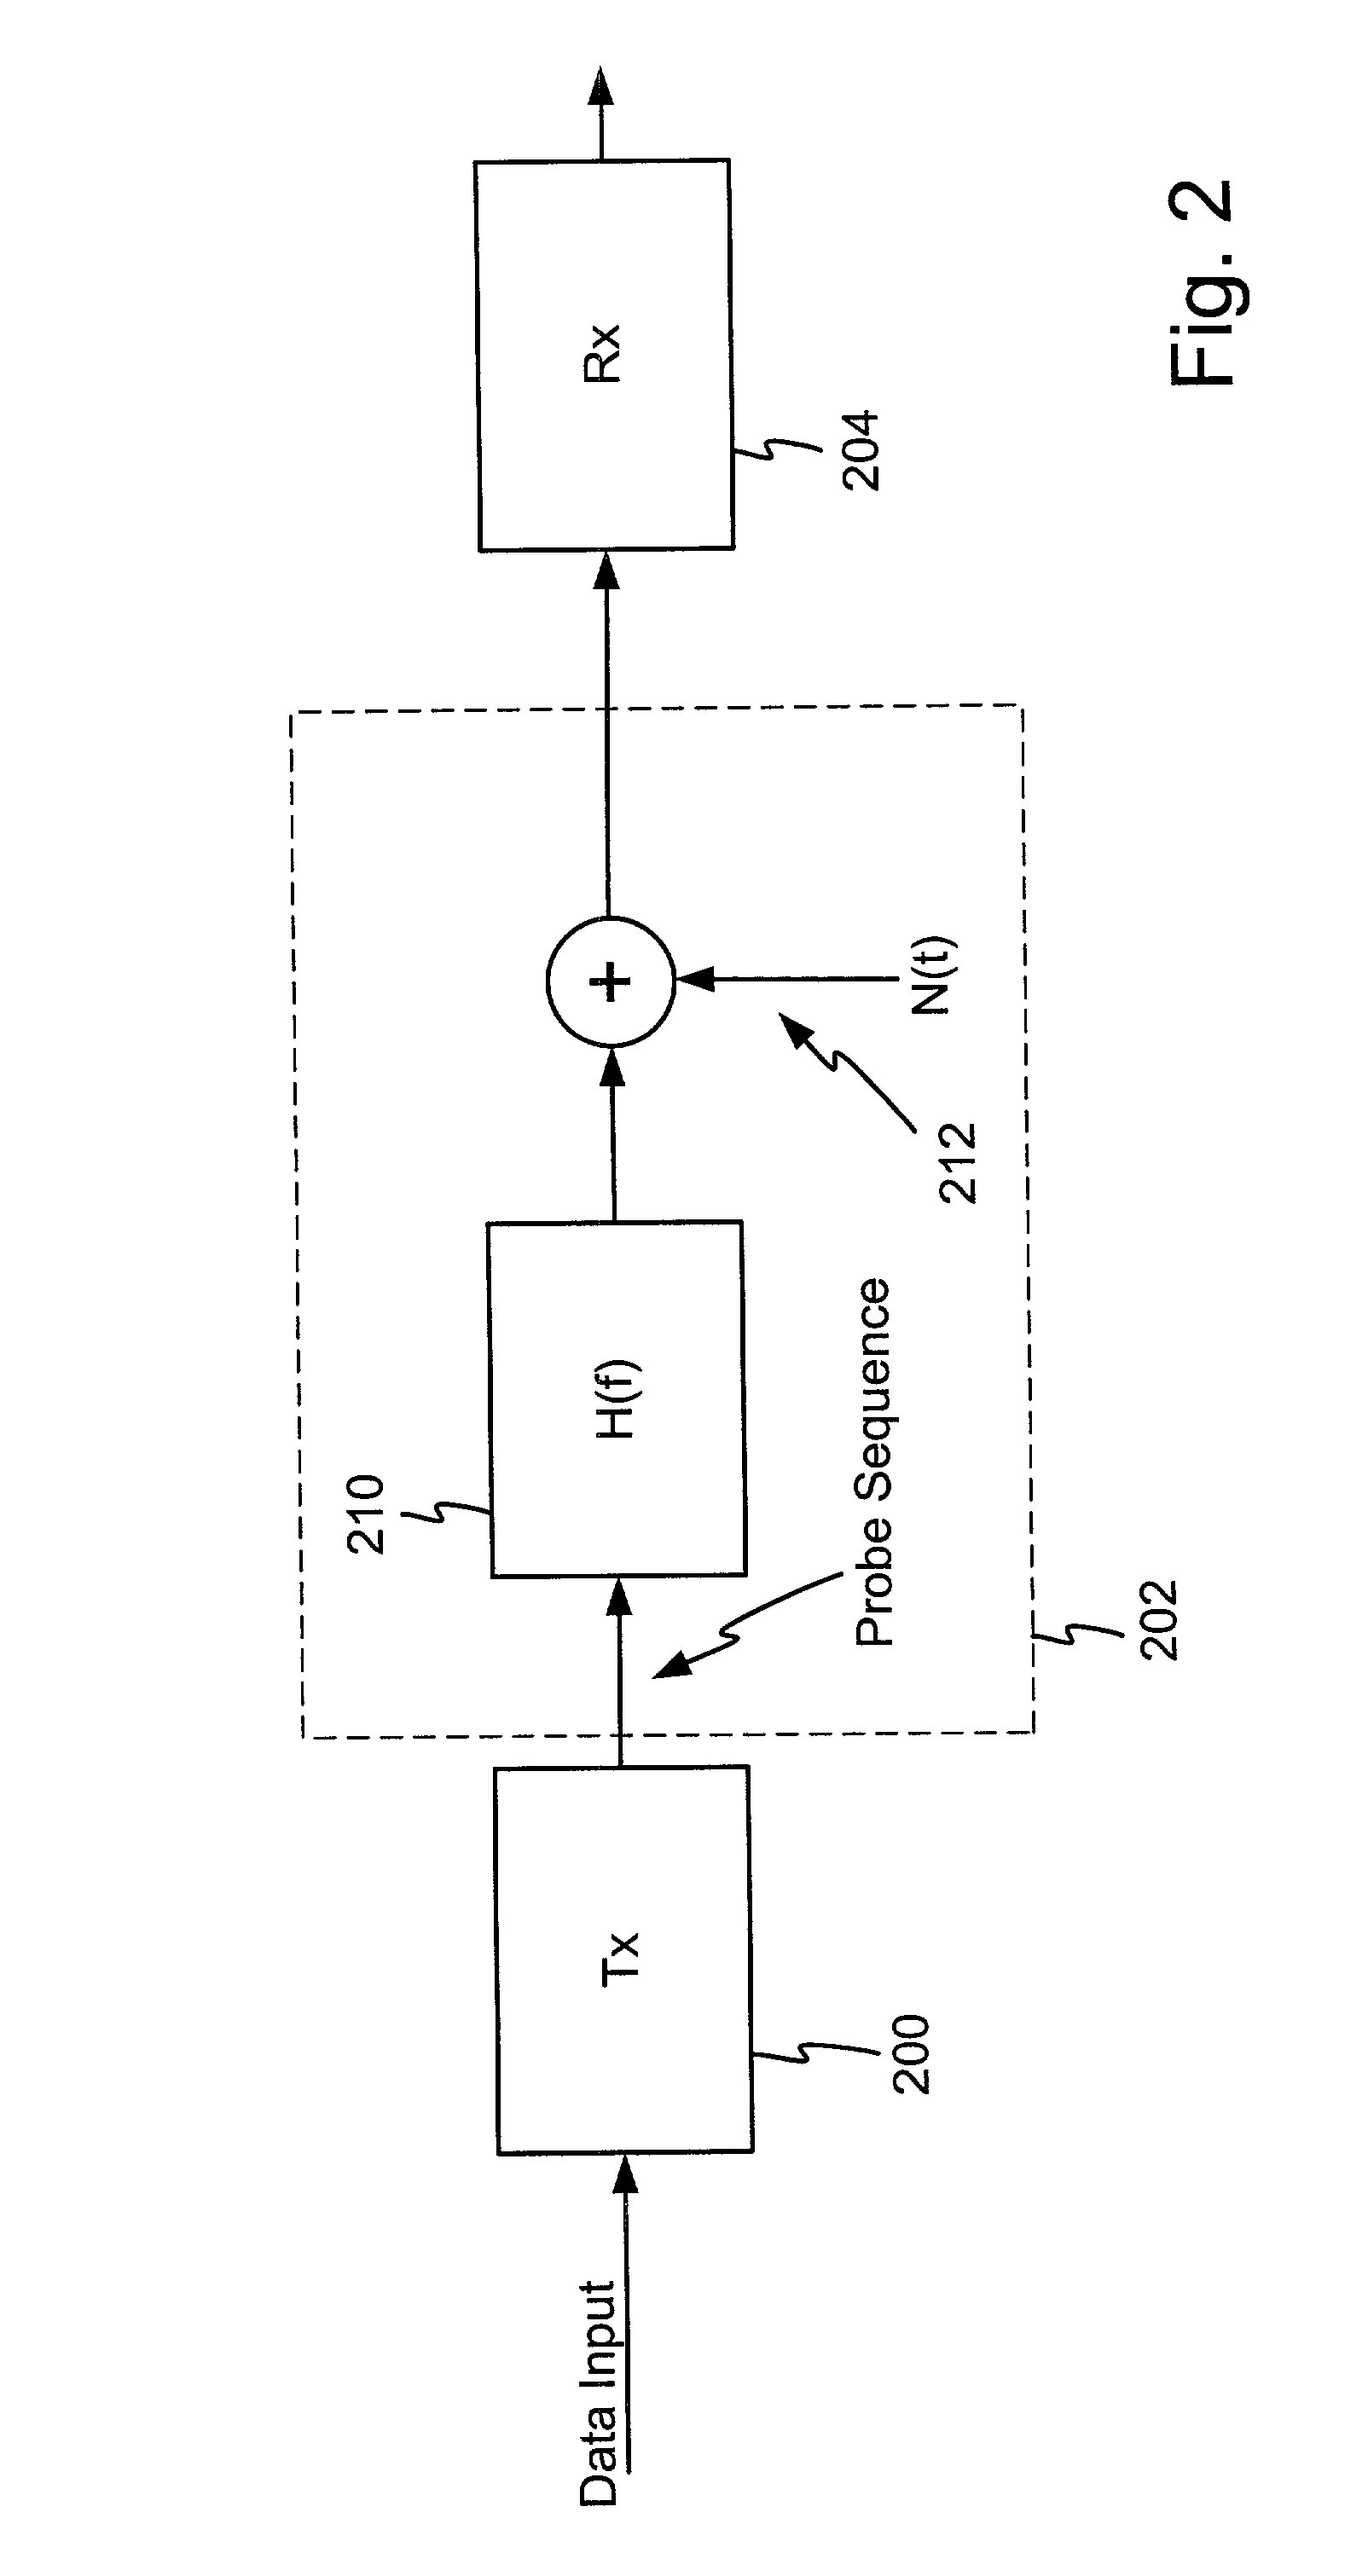 Line probe signal and method of use